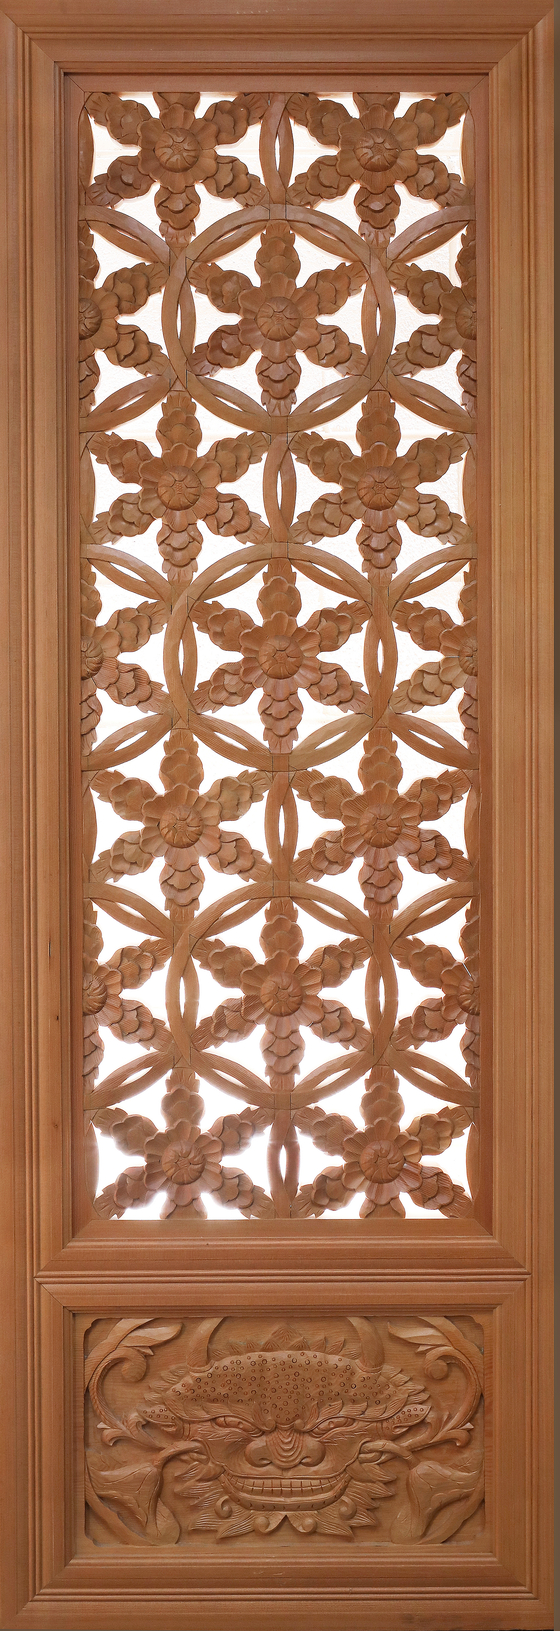 Kkotsalmun, meaning a wooden door with flower patterns, created by Ga  [PARK SANG-MOON]